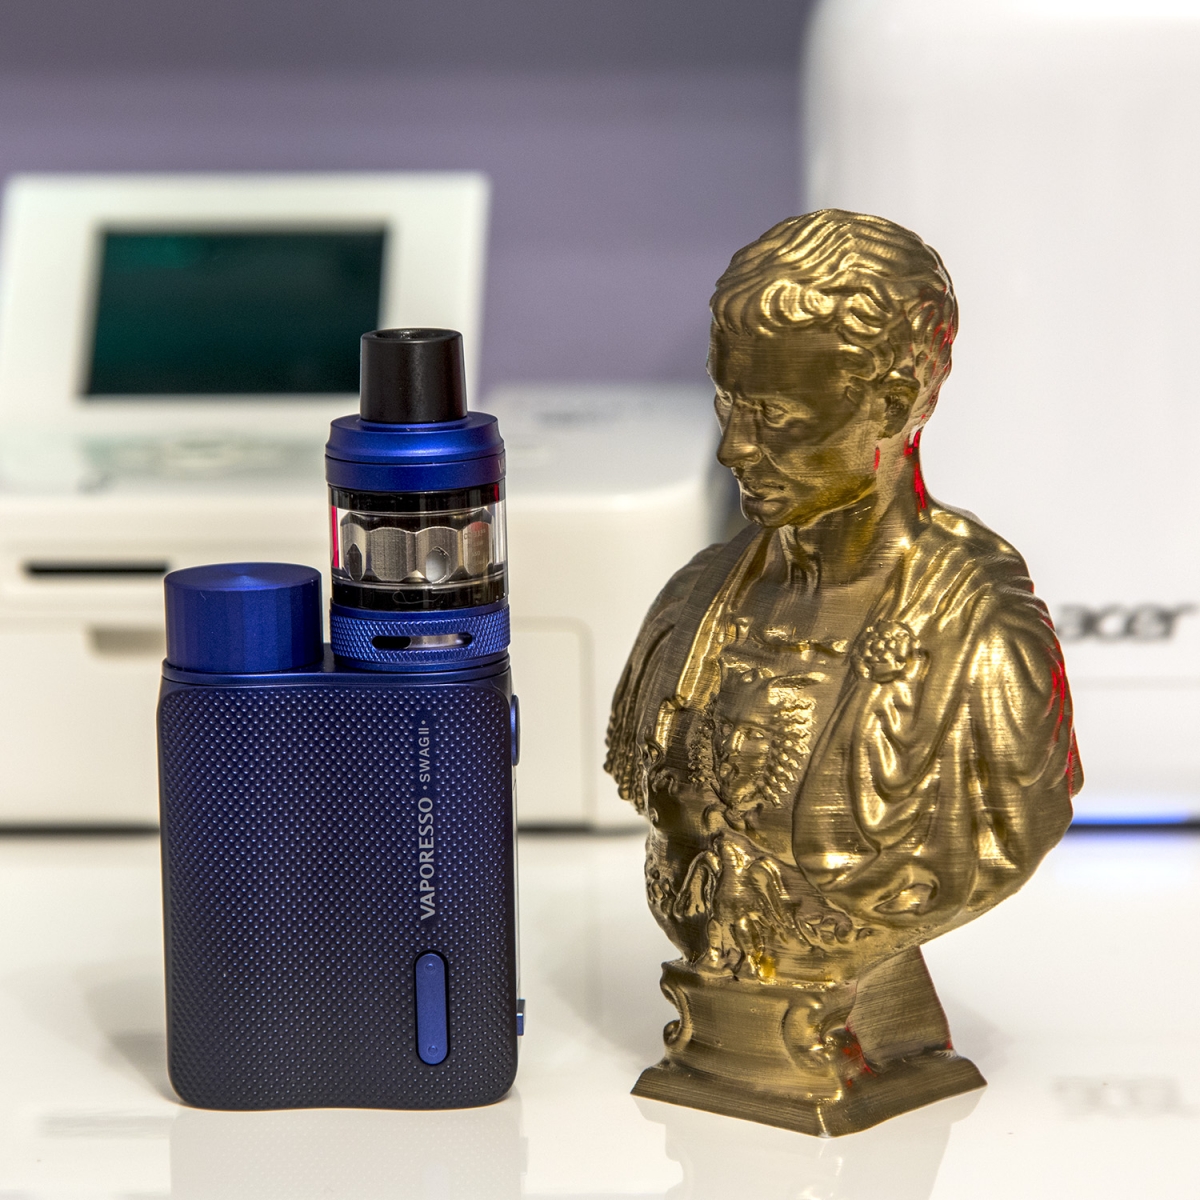 Vaporesso Swag 2 hanging with the masters